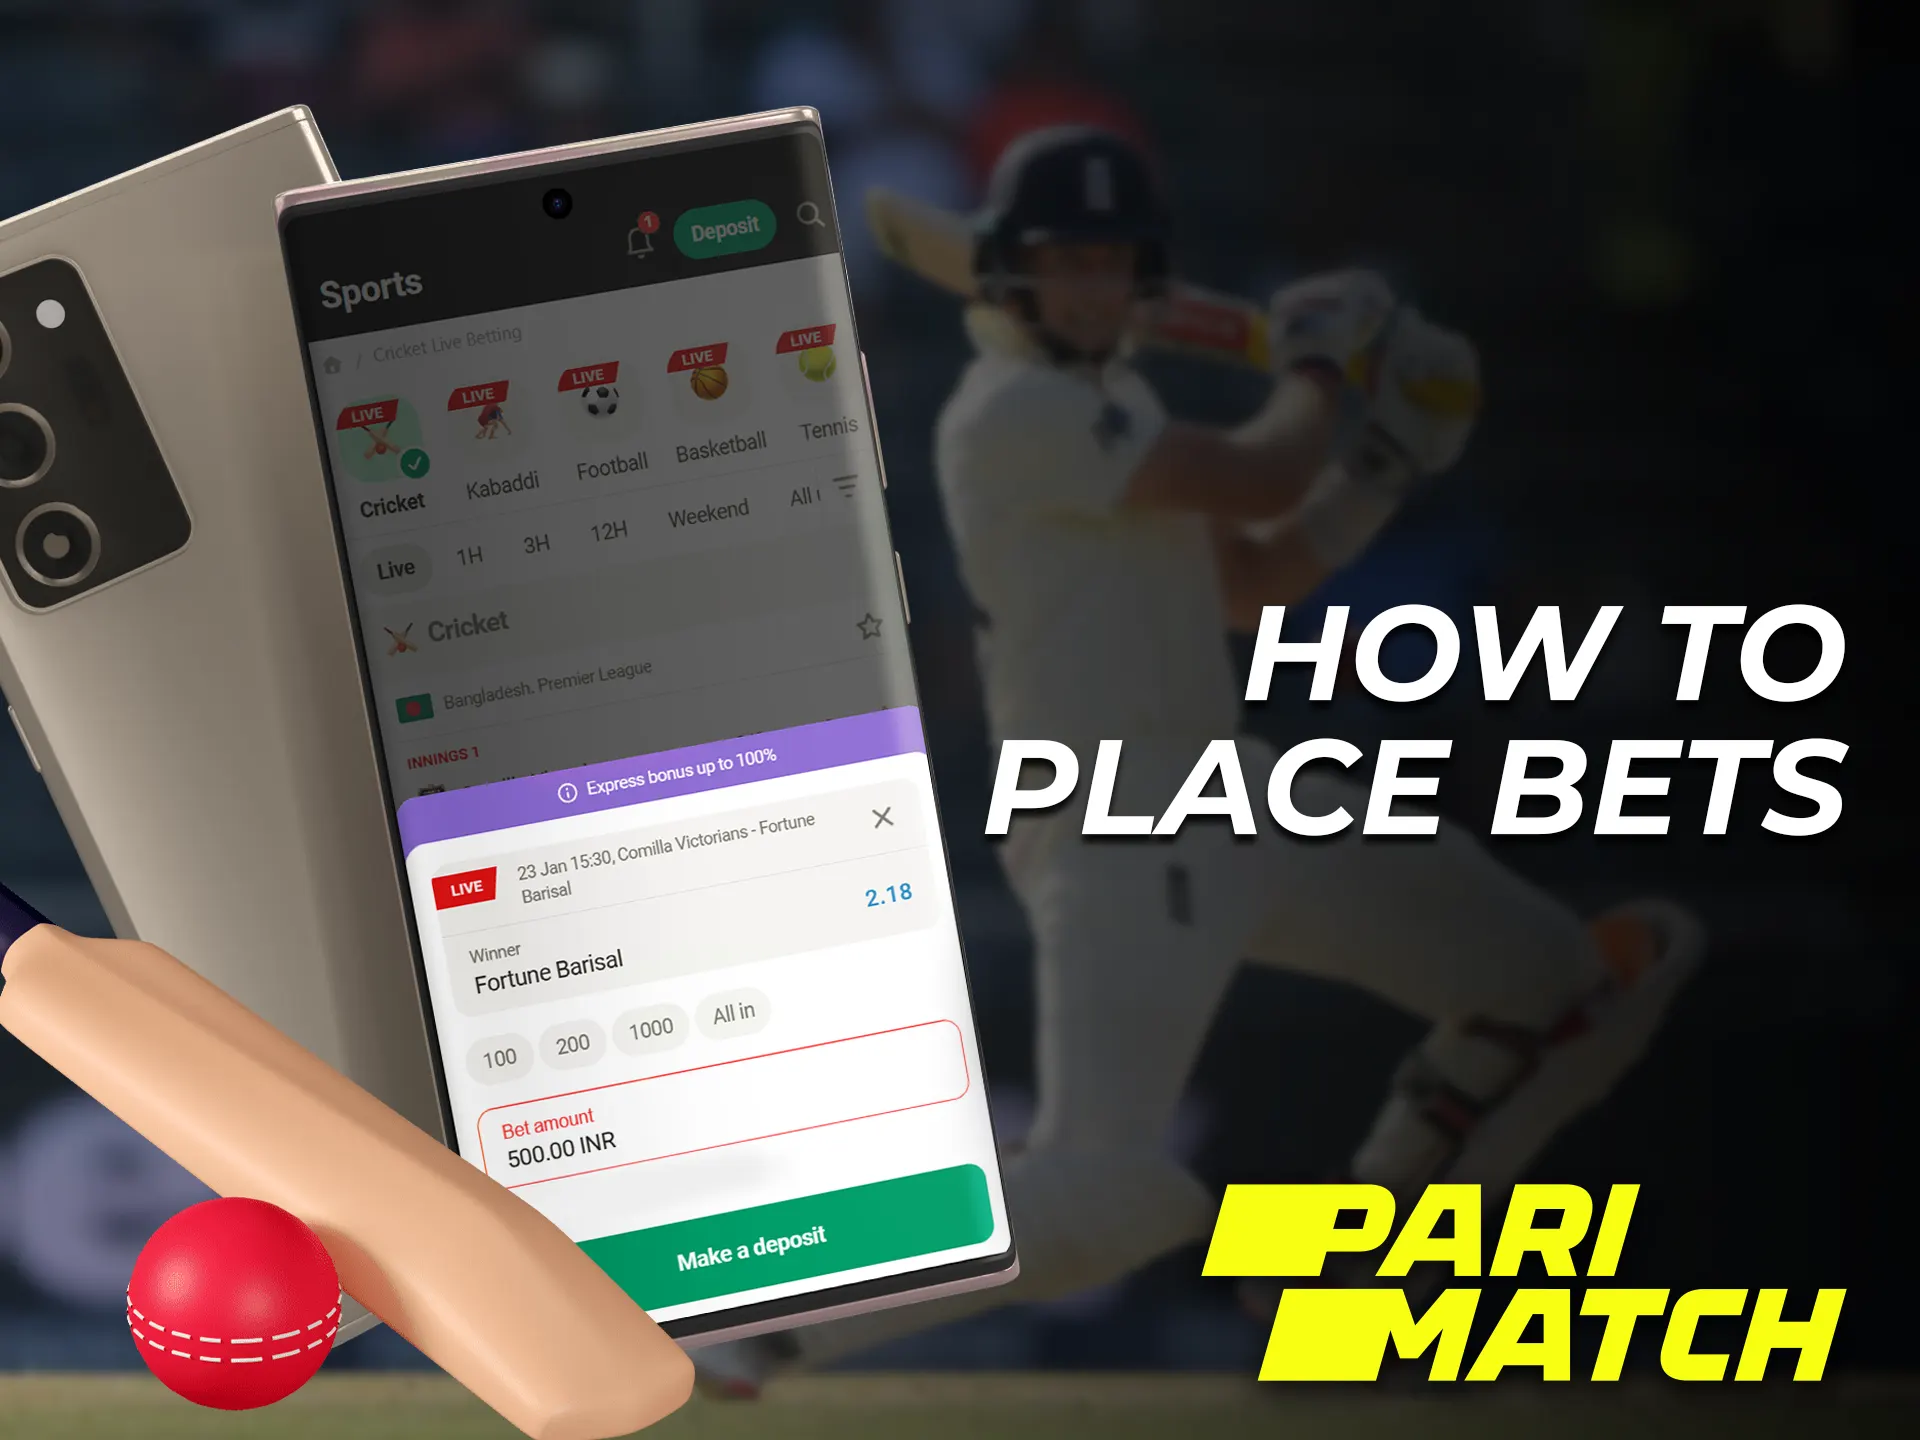 You can place bets in the Parimatch app immediately after making a deposit.